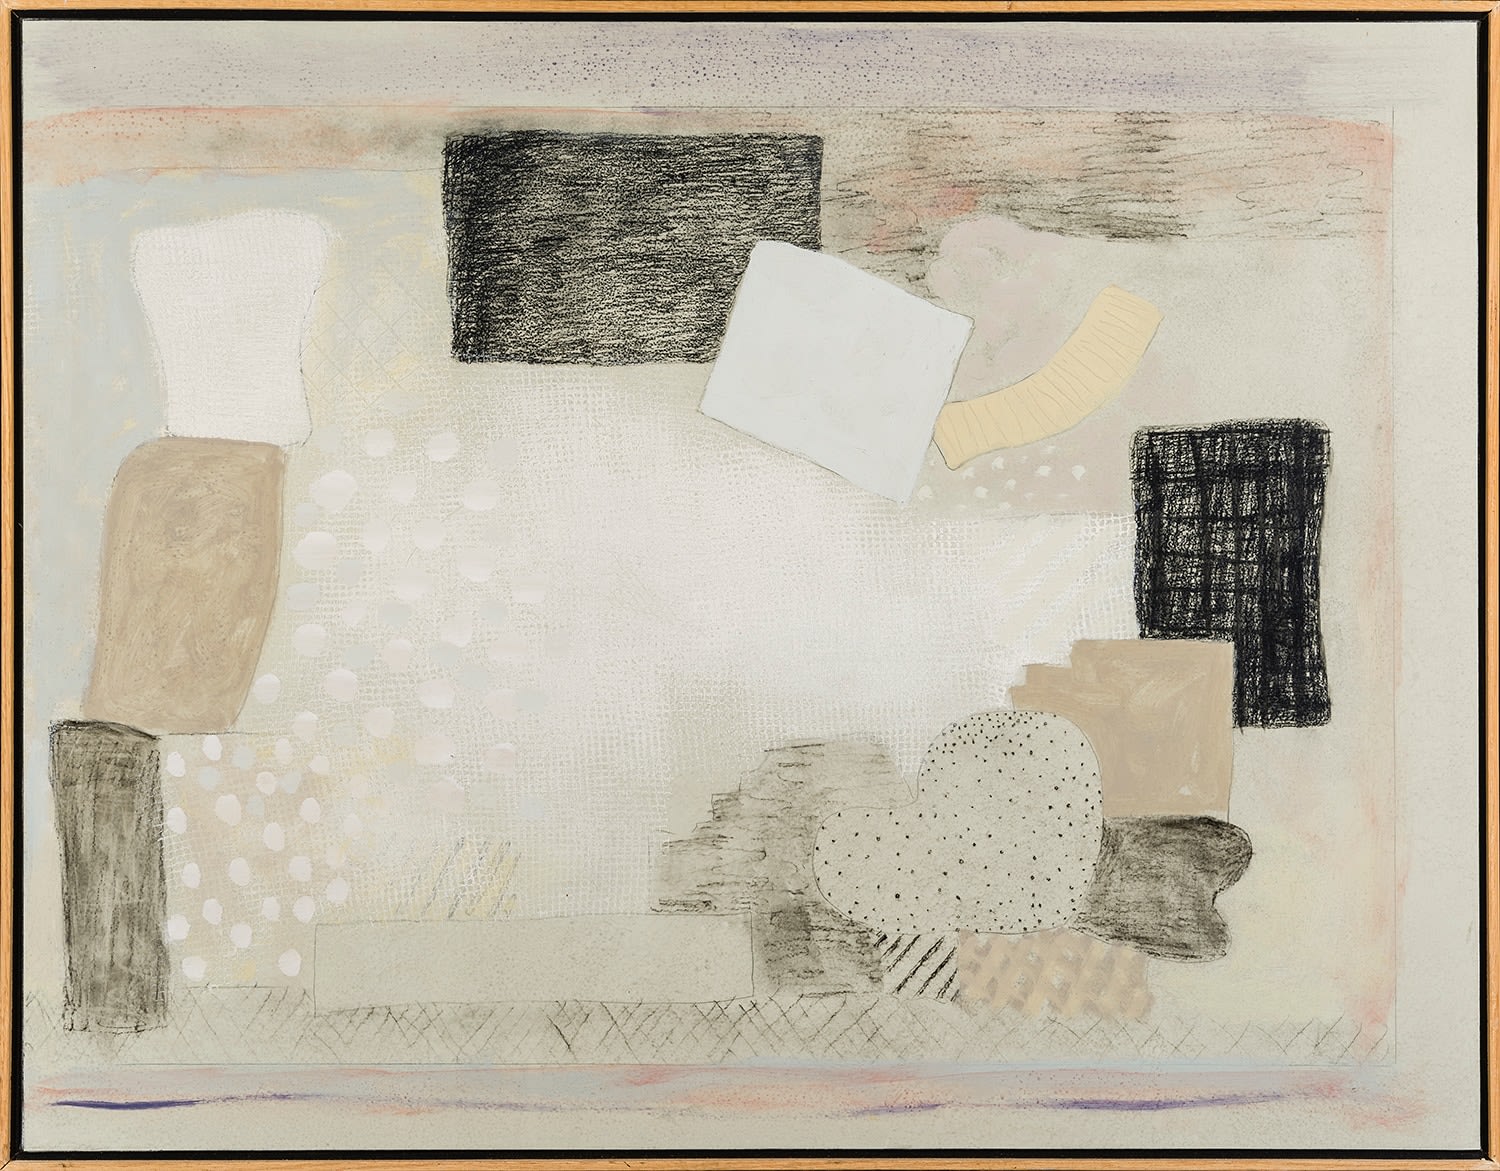 Untitled, 1997 Acrylic and graphite on paper mounted on canvas, 27 x 35 in.